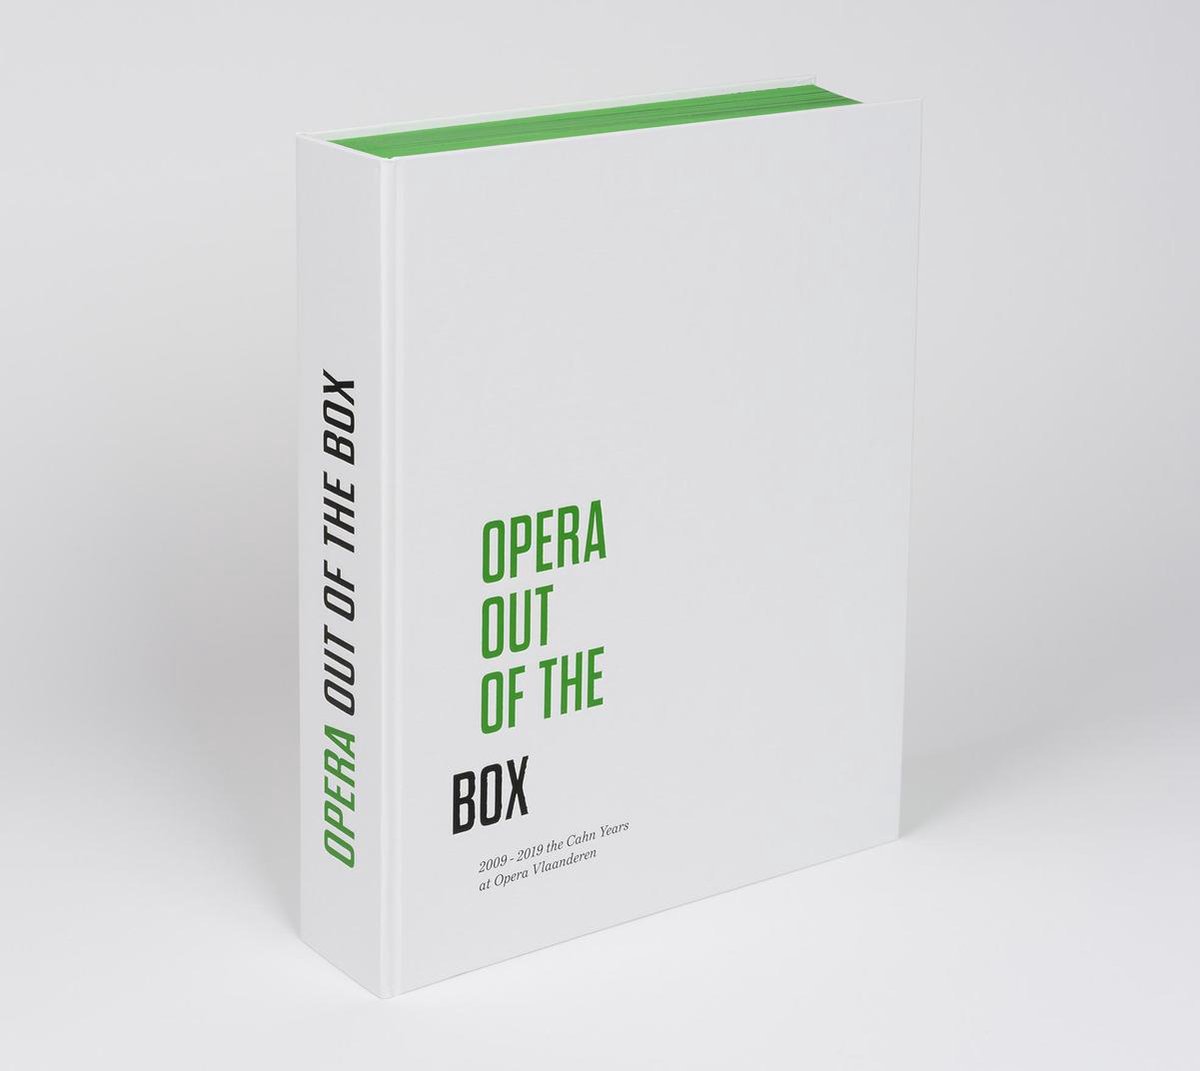 Opera Out of the Box, 2009-2019, 
The Cahn Years at Opera Vlaanderen